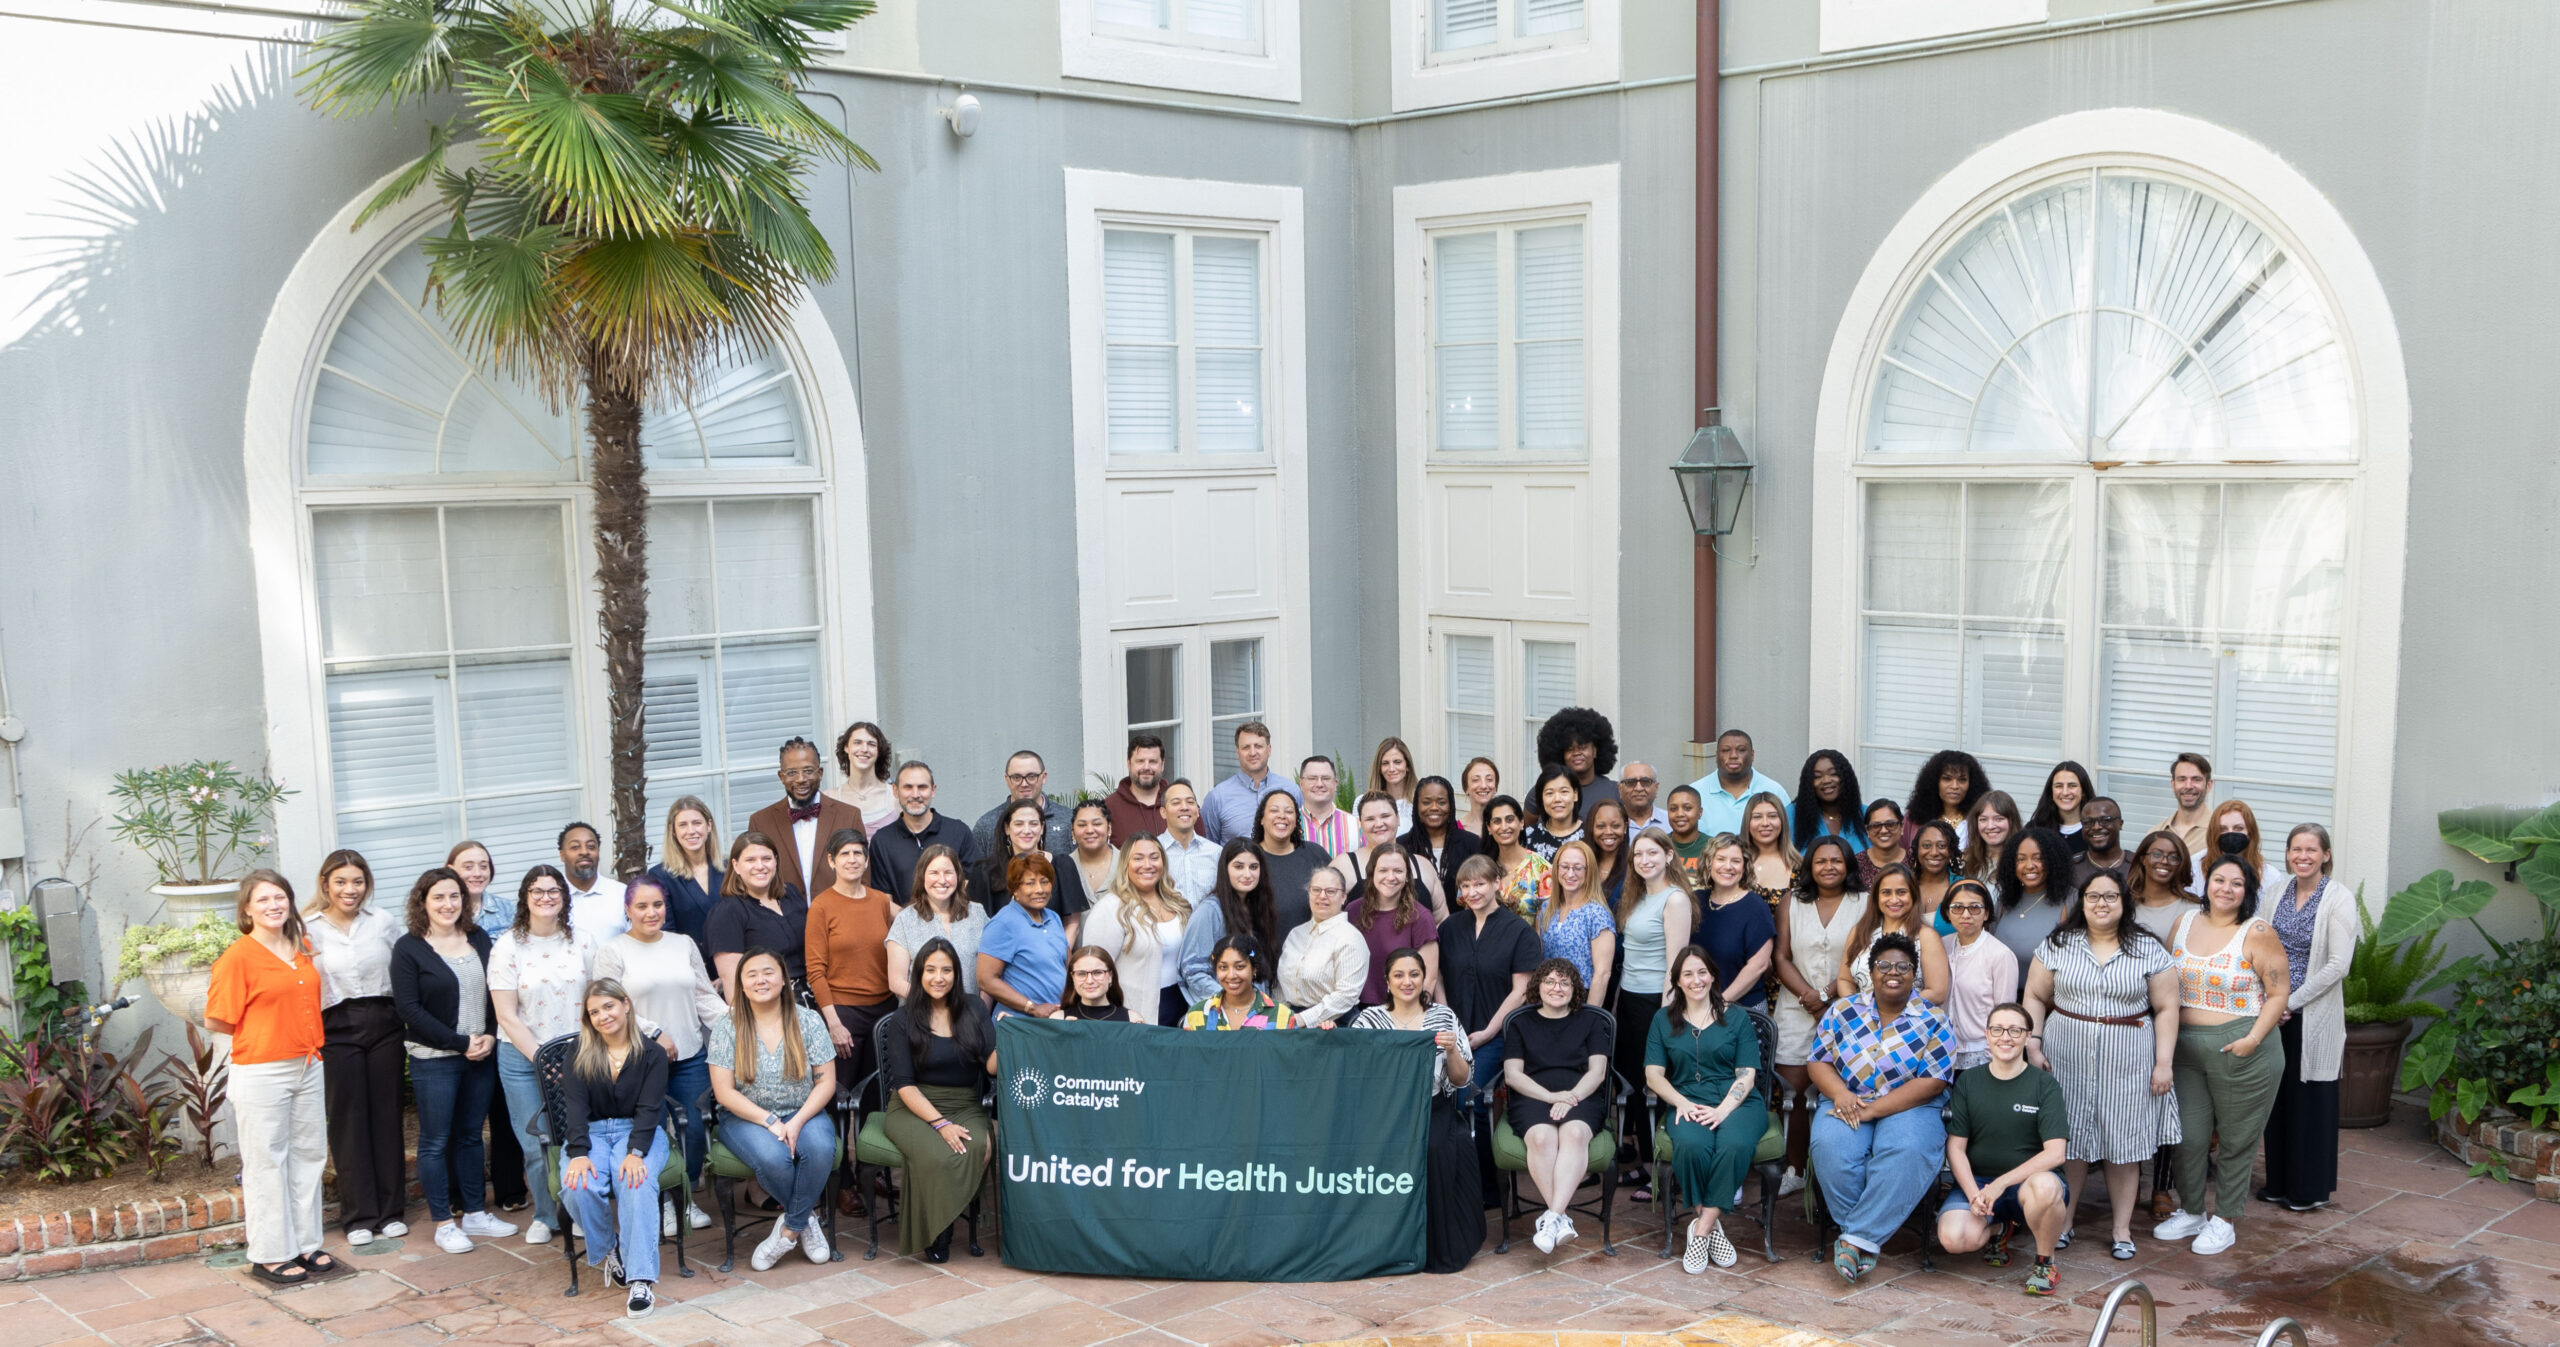 Community Catalyst staff pose for a photo in front of large windows and a palm tree. In the middle of the group is a dark green banner with Community Catalyst's logo and the words "United for Health Justice" written.